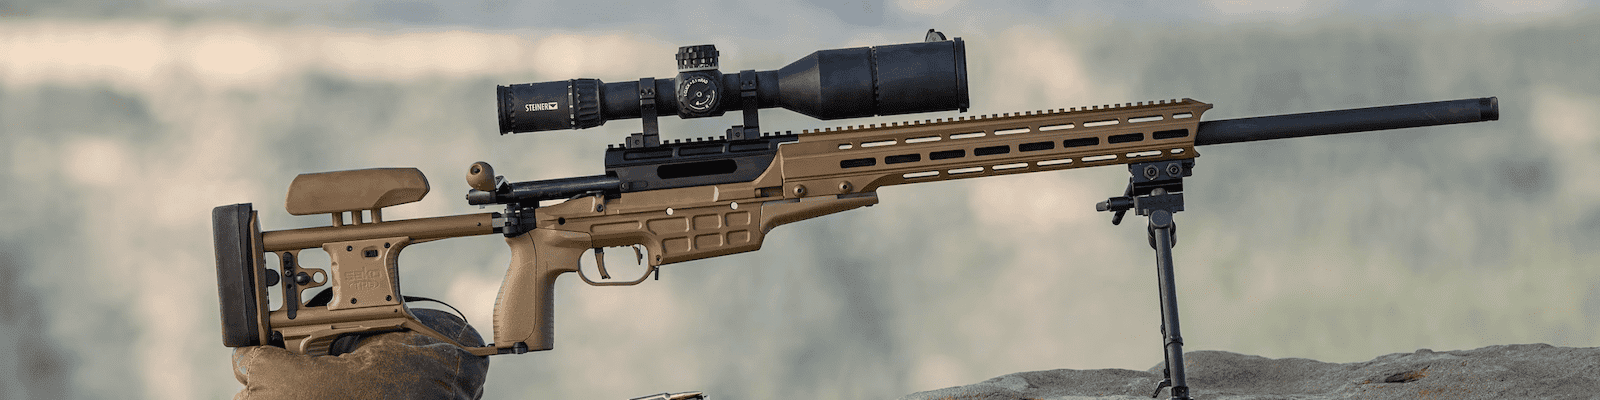 Sako TRG 22 A1 Mittelchassis Coyote Brown